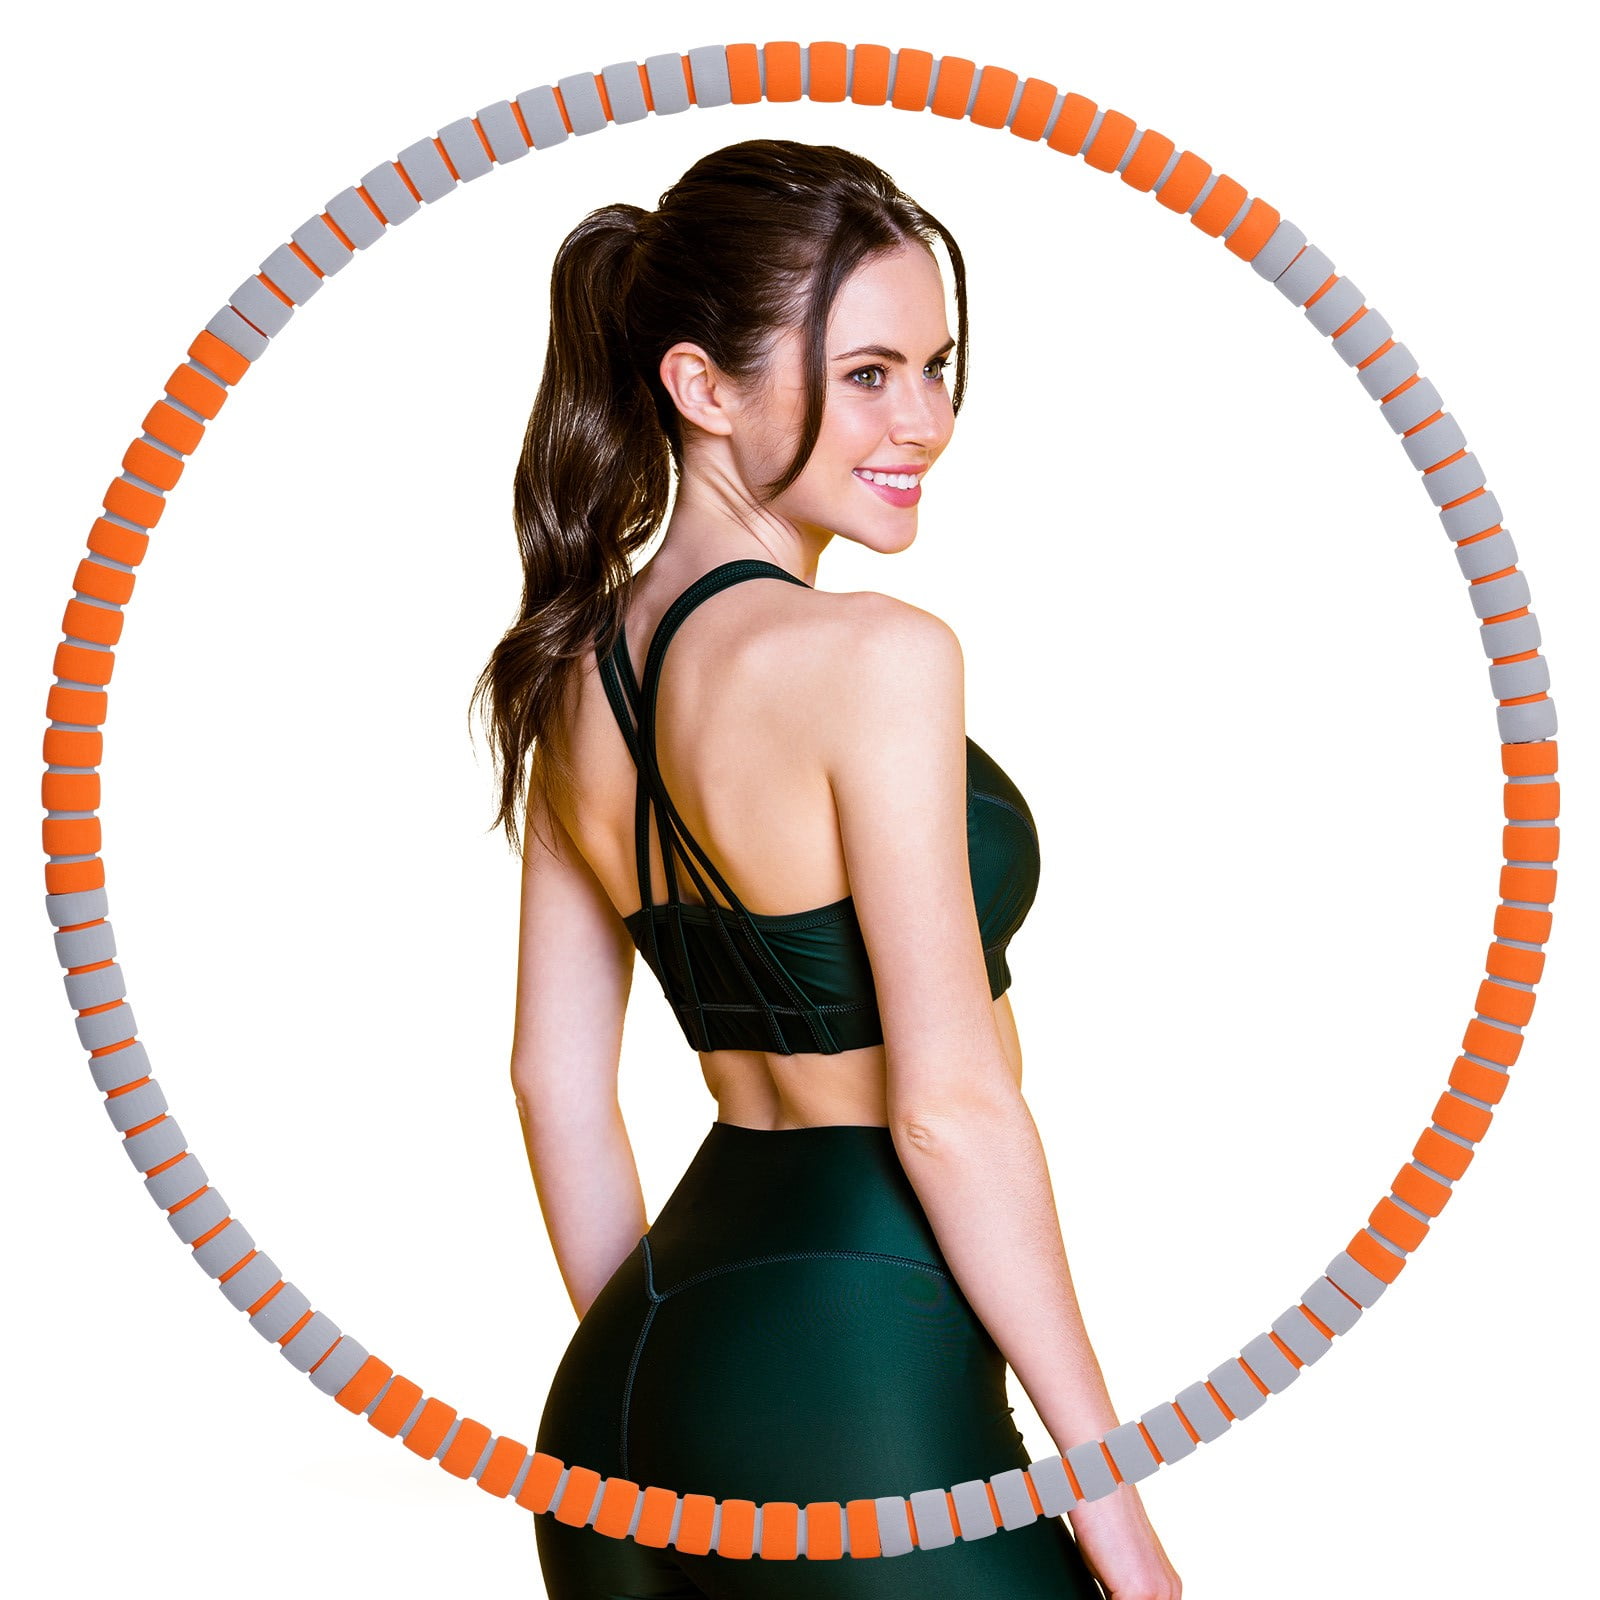 Details about   Rattan Strip Hula Hoop Exercise Fitness Plastic Weighted Hoops Indoor Outdoor 